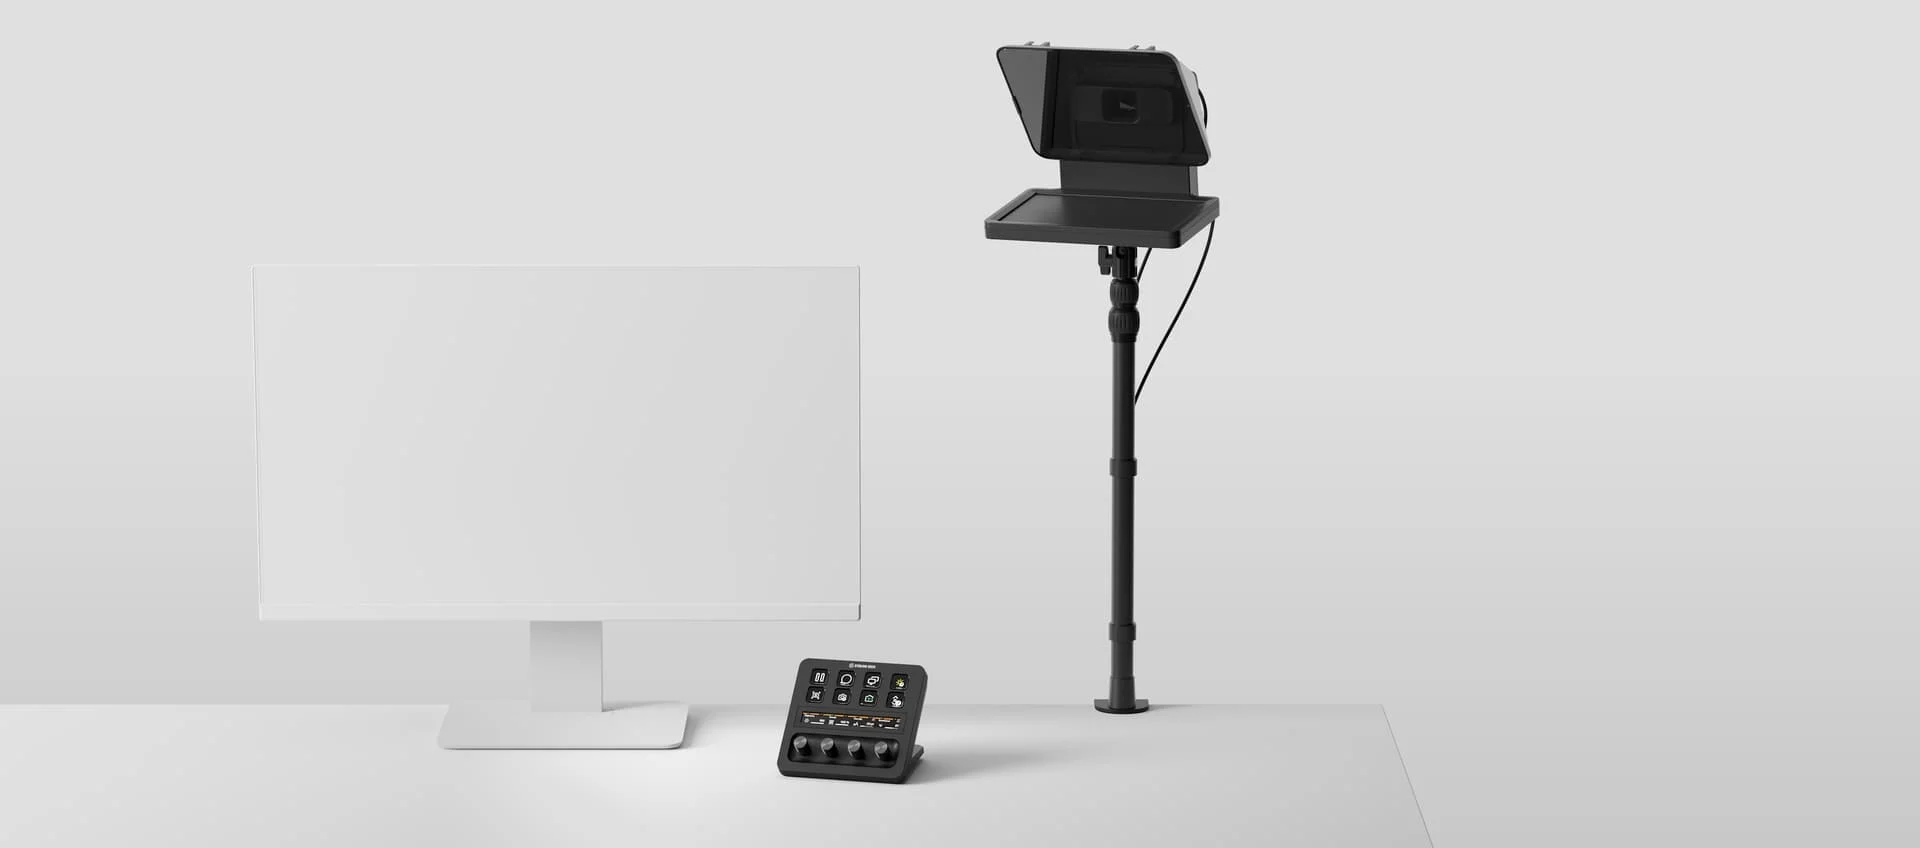 The Elgato Prompter is a teleprompter for content creators